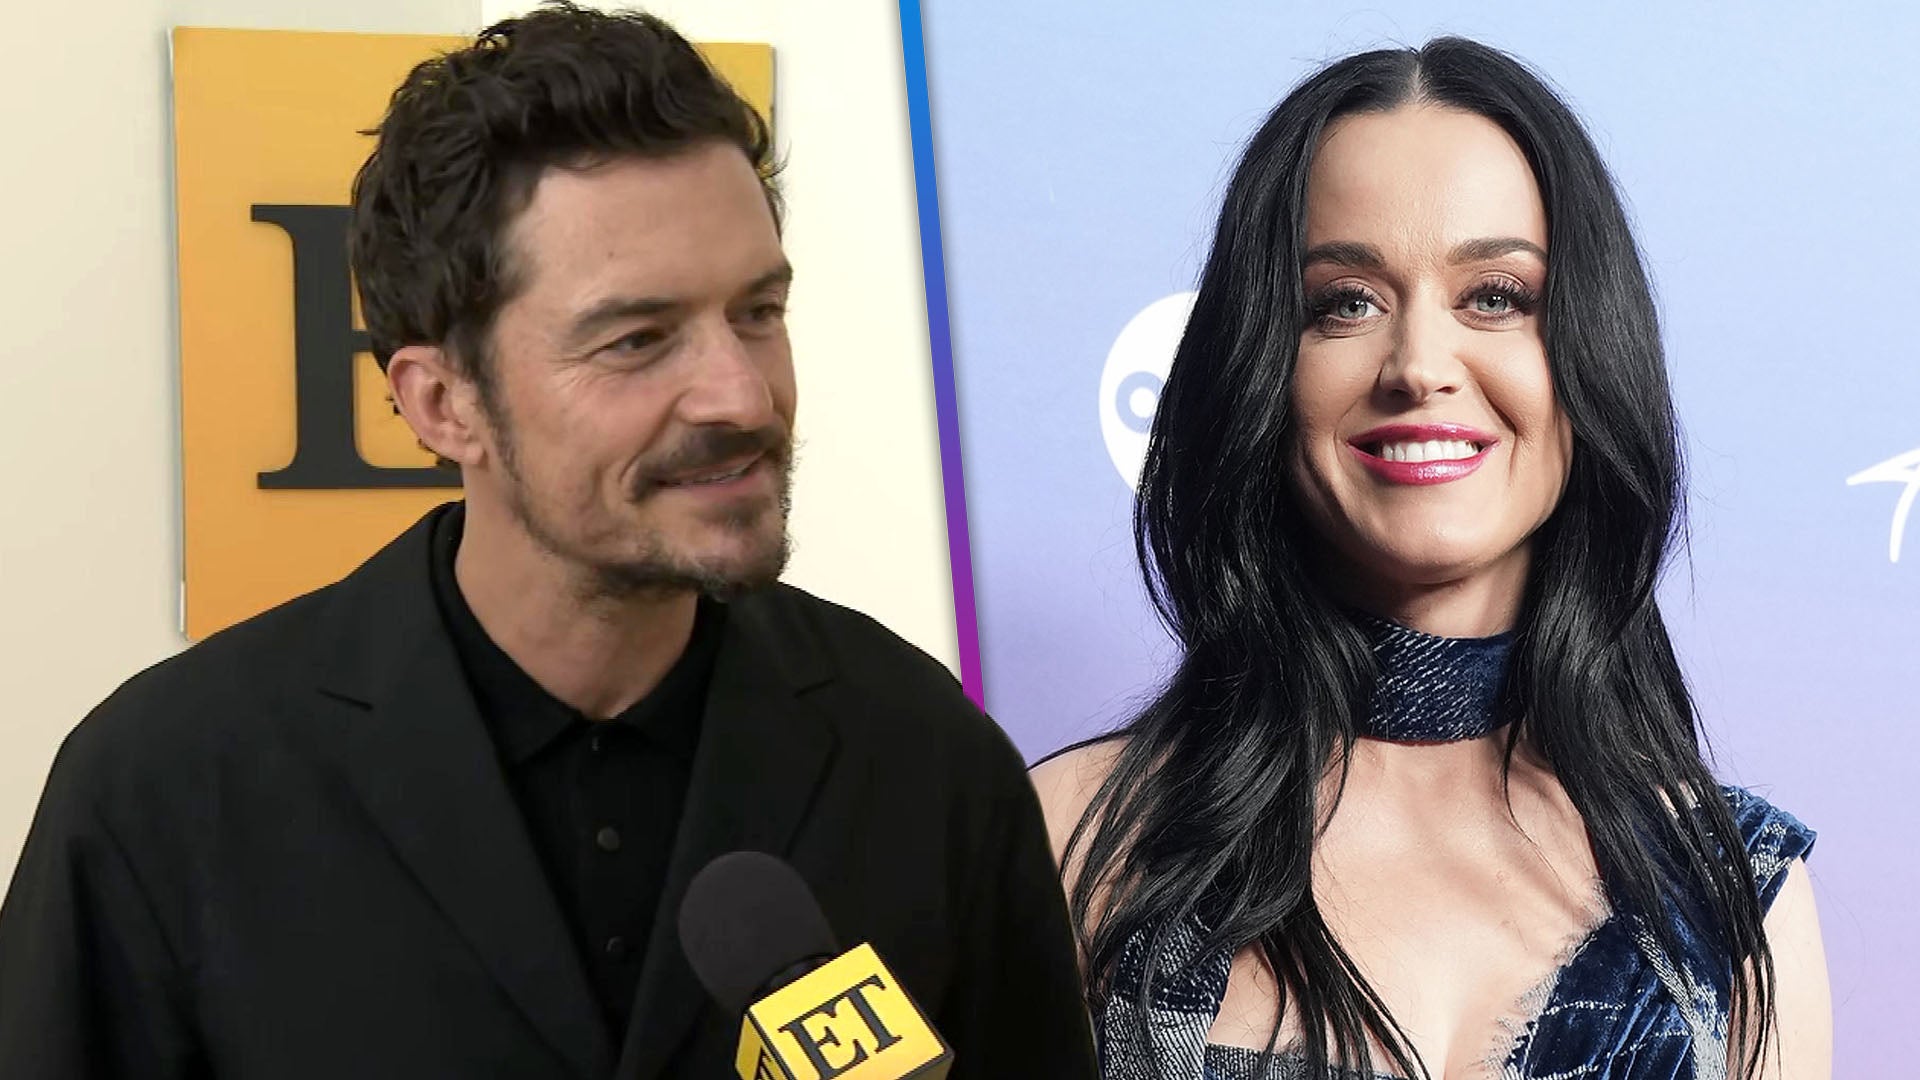 Why did Katy Perry take a sober 'pact' with Orlando Bloom? - Los Angeles  Times